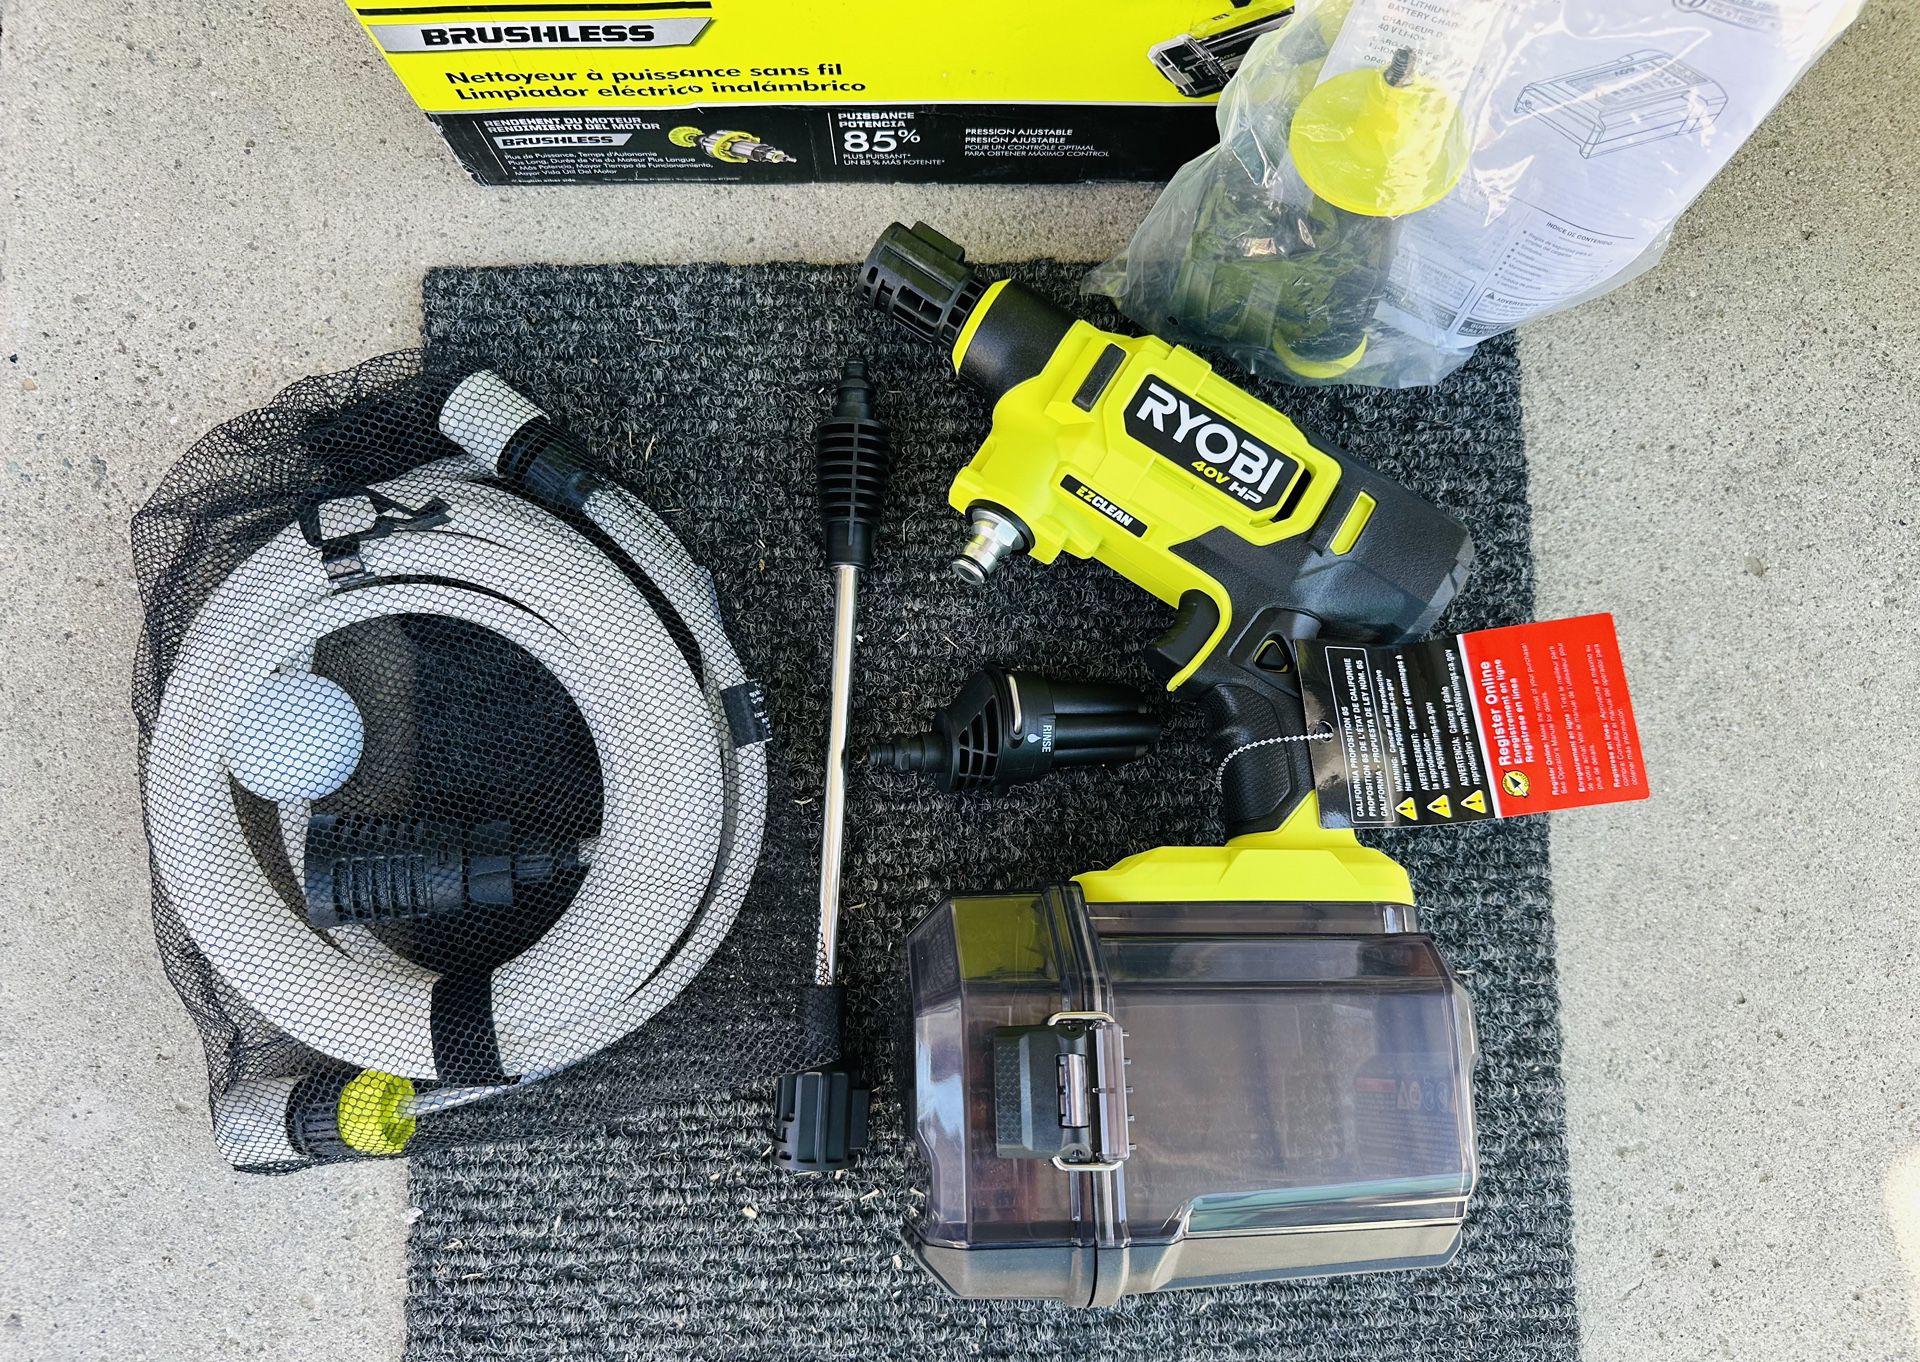 RYOBI 40V HP Brushless EZClean 600 PSI 0.7 GPM Cold Water Electric Power Cleaner (TOOL ONLY/SOLO LA HERRAMIENTA)